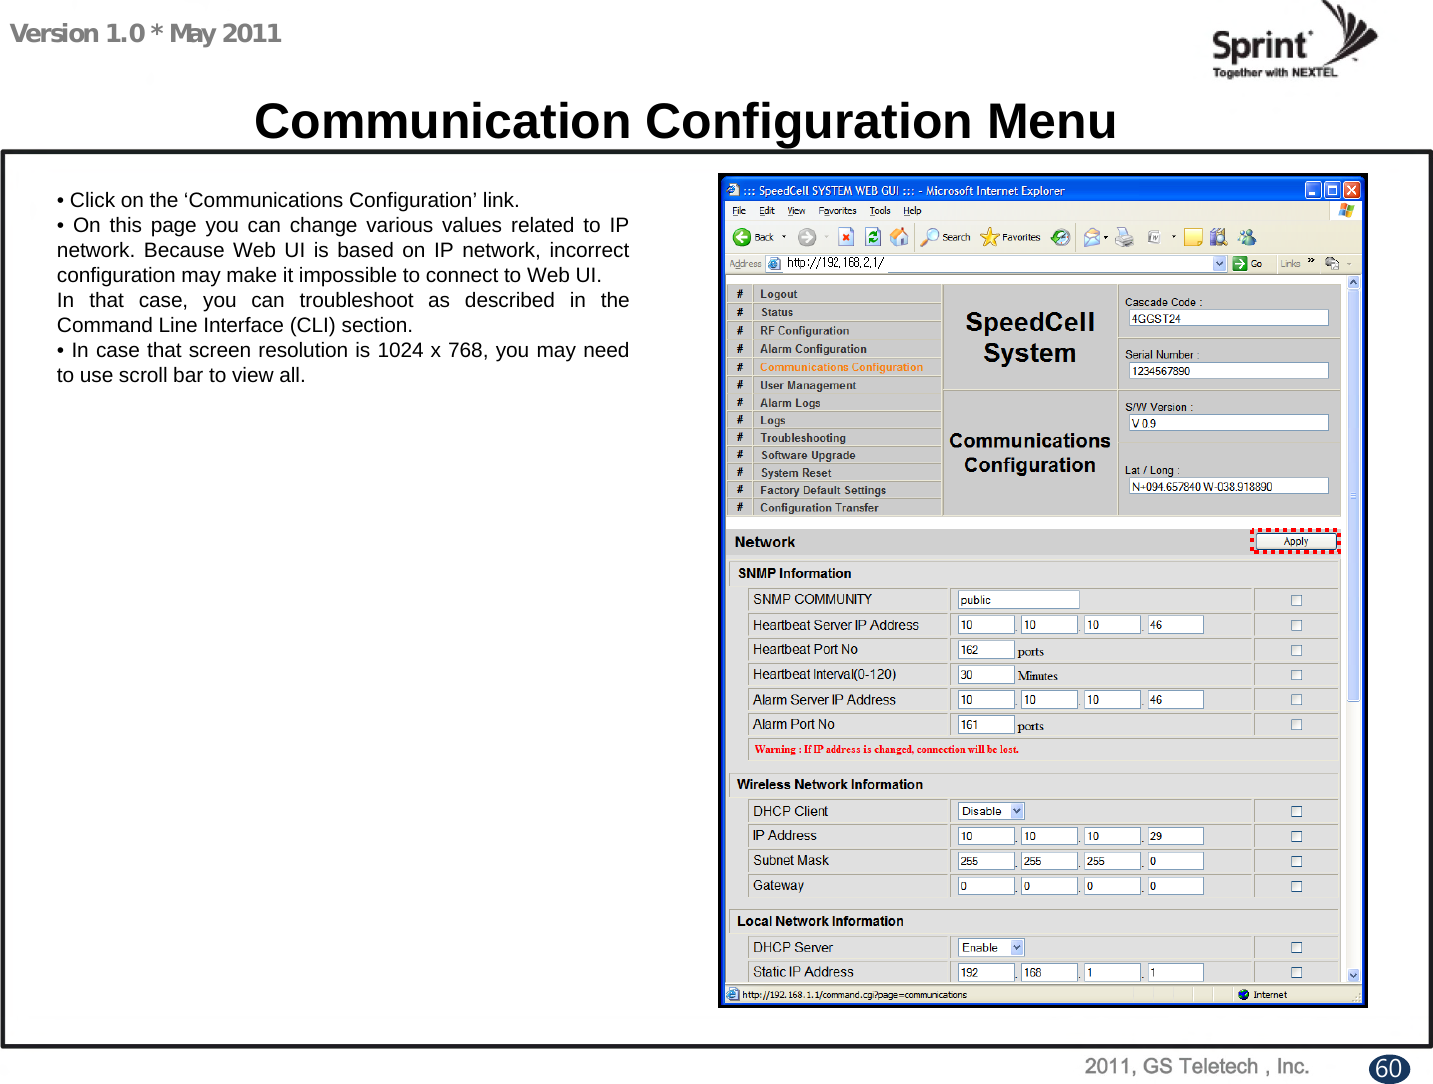 Version 1.0 * May 2011Communication Configuration Menu• Click on the ‘Communications Configuration’ link.• On this page you can change various values related to IP network. Because Web UI is based on IP network, incorrect configuration may make it impossible to connect to Web UI.In that case, you can troubleshoot as described in the Command Line Interface (CLI) section.• In case that screen resolution is 1024 x 768, you may need to use scroll bar to view all.60